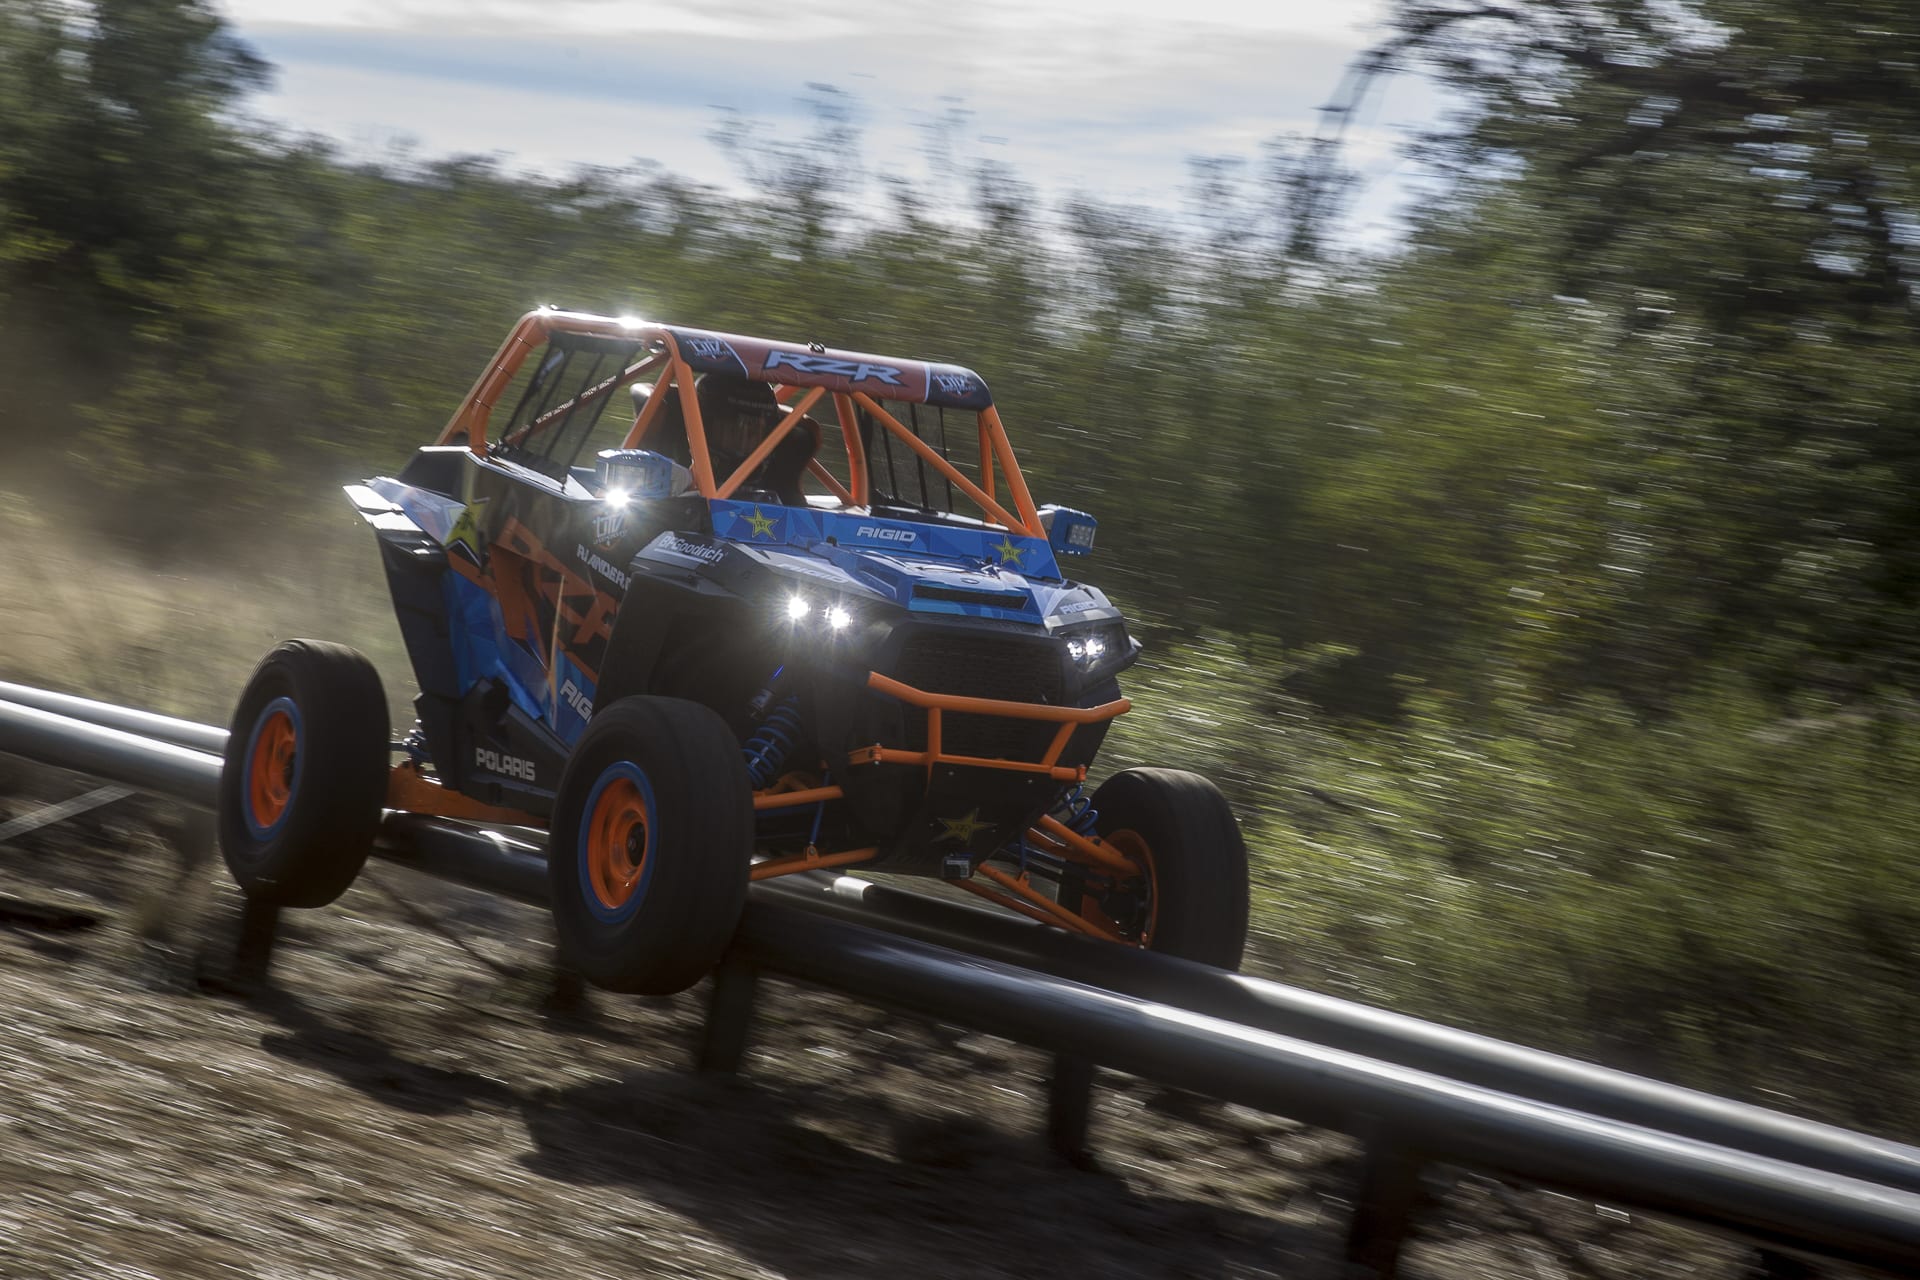 RJ Anderson’s XP1K4 Off-Road Video Now LIVE!